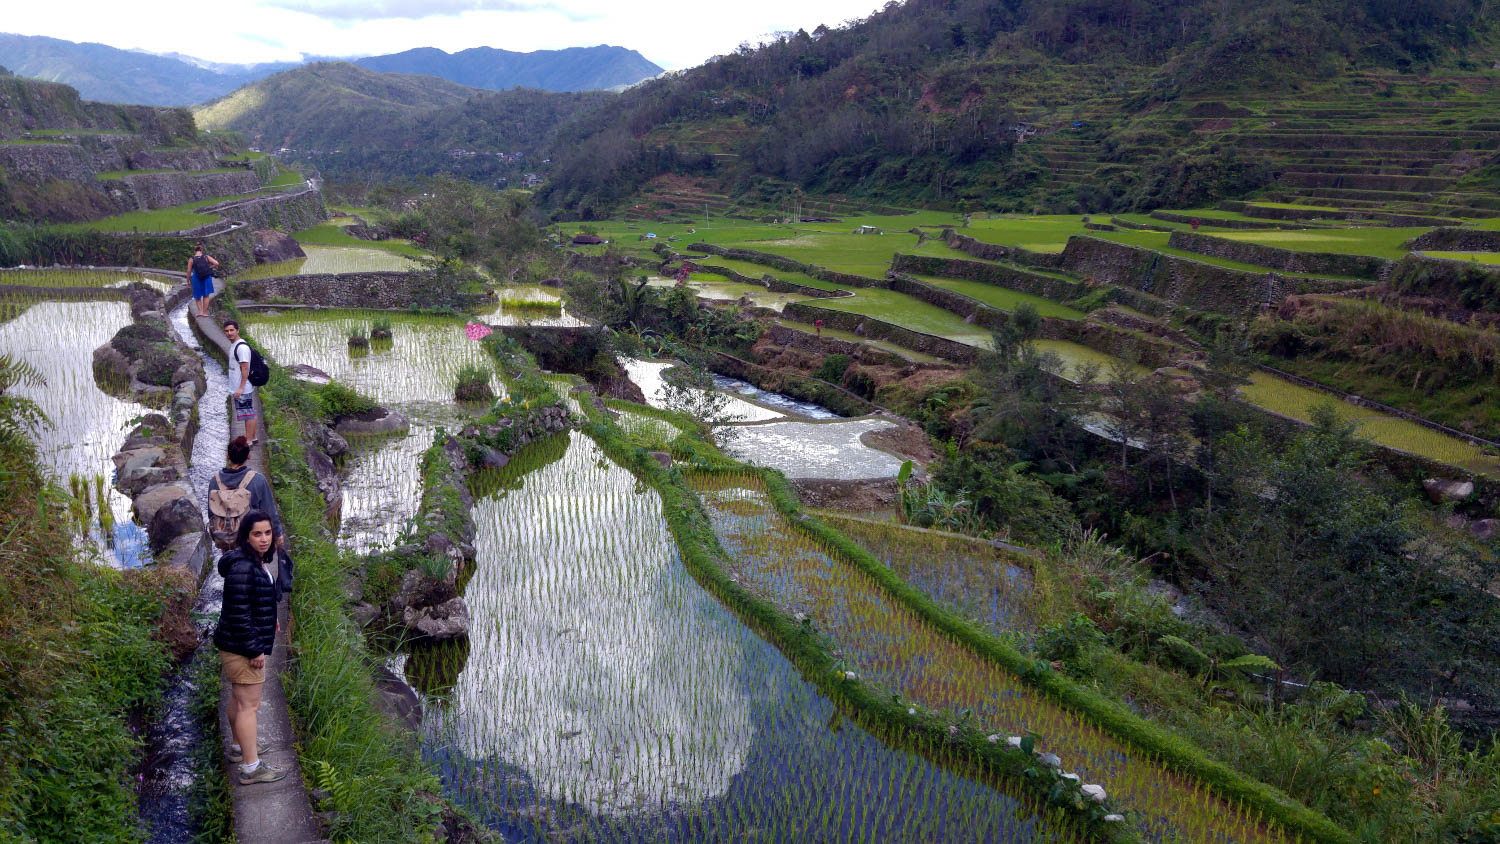 Banaue Rice Terraces How to get there and What to do